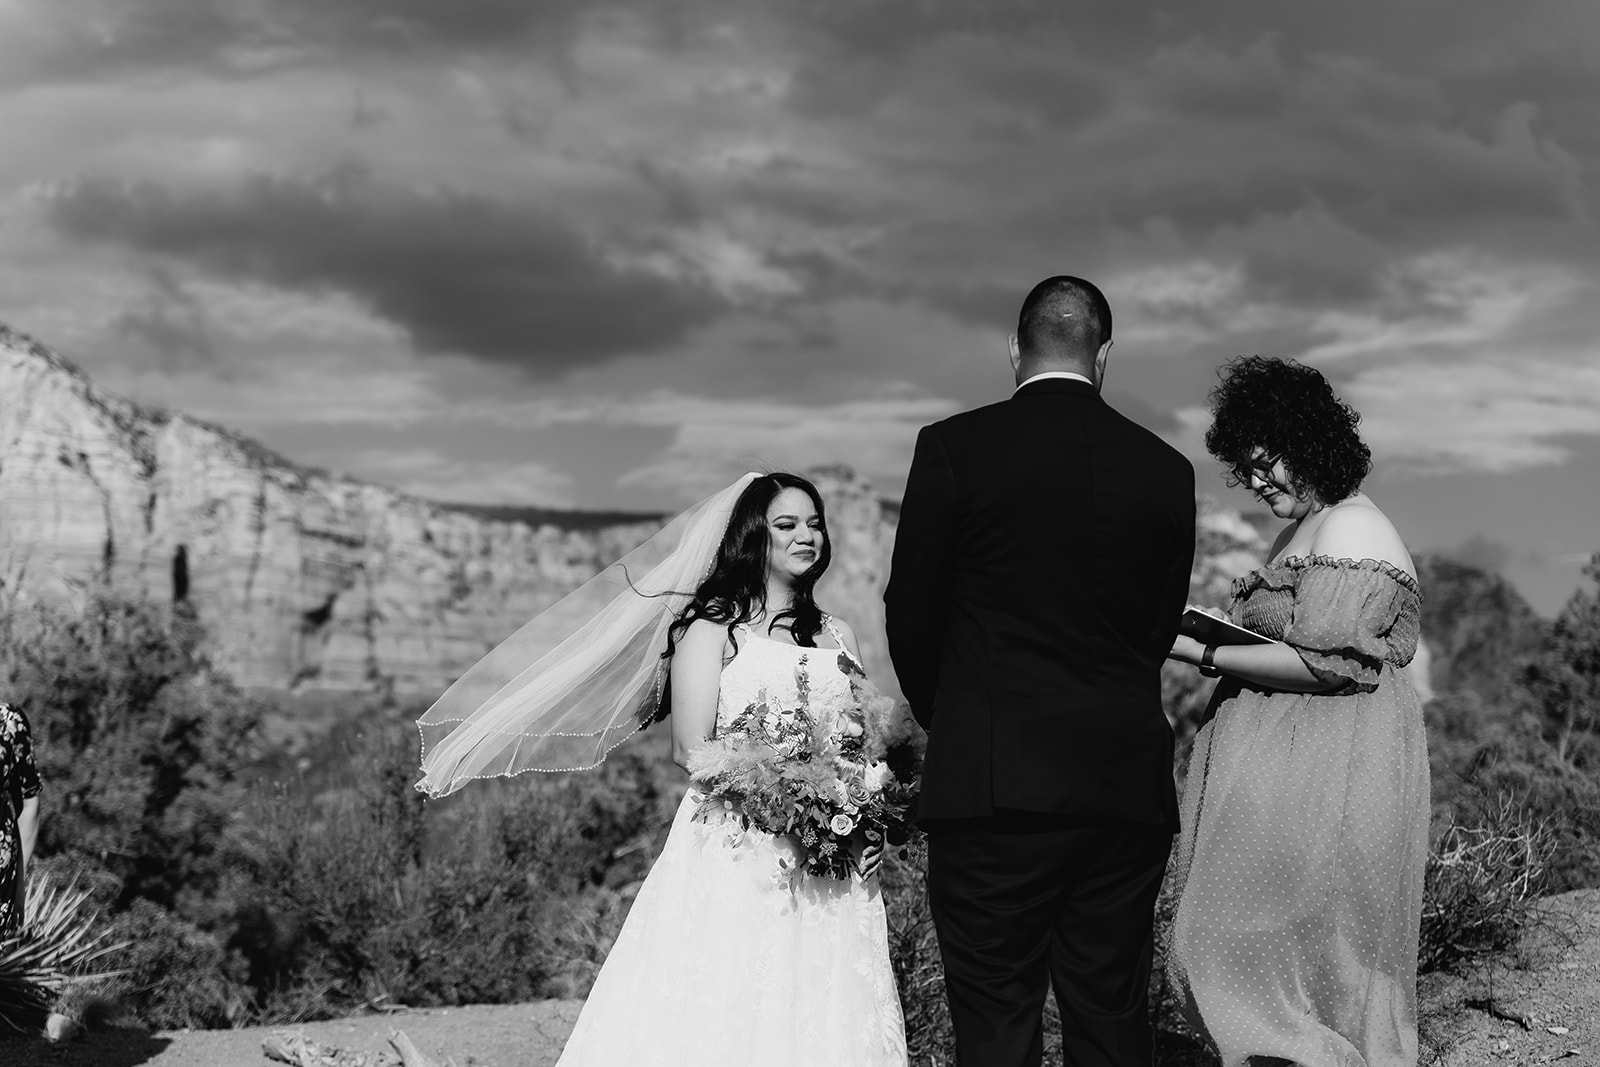 A couple who eloped in sedona